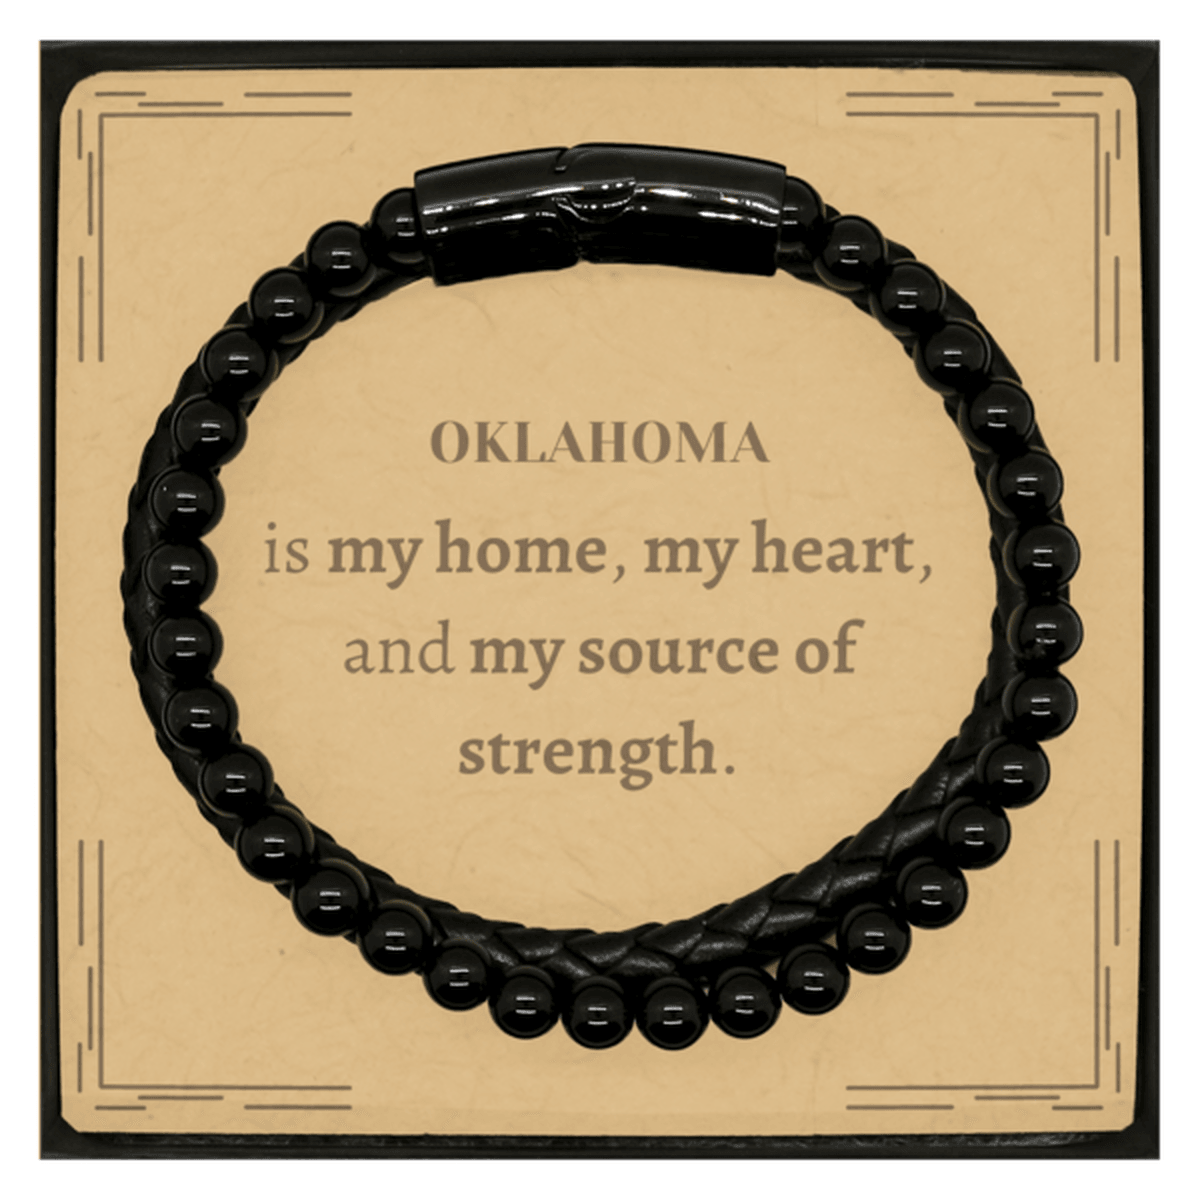 Oklahoma is my home Gifts, Lovely Oklahoma Birthday Christmas Stone Leather Bracelets For People from Oklahoma, Men, Women, Friends - Mallard Moon Gift Shop